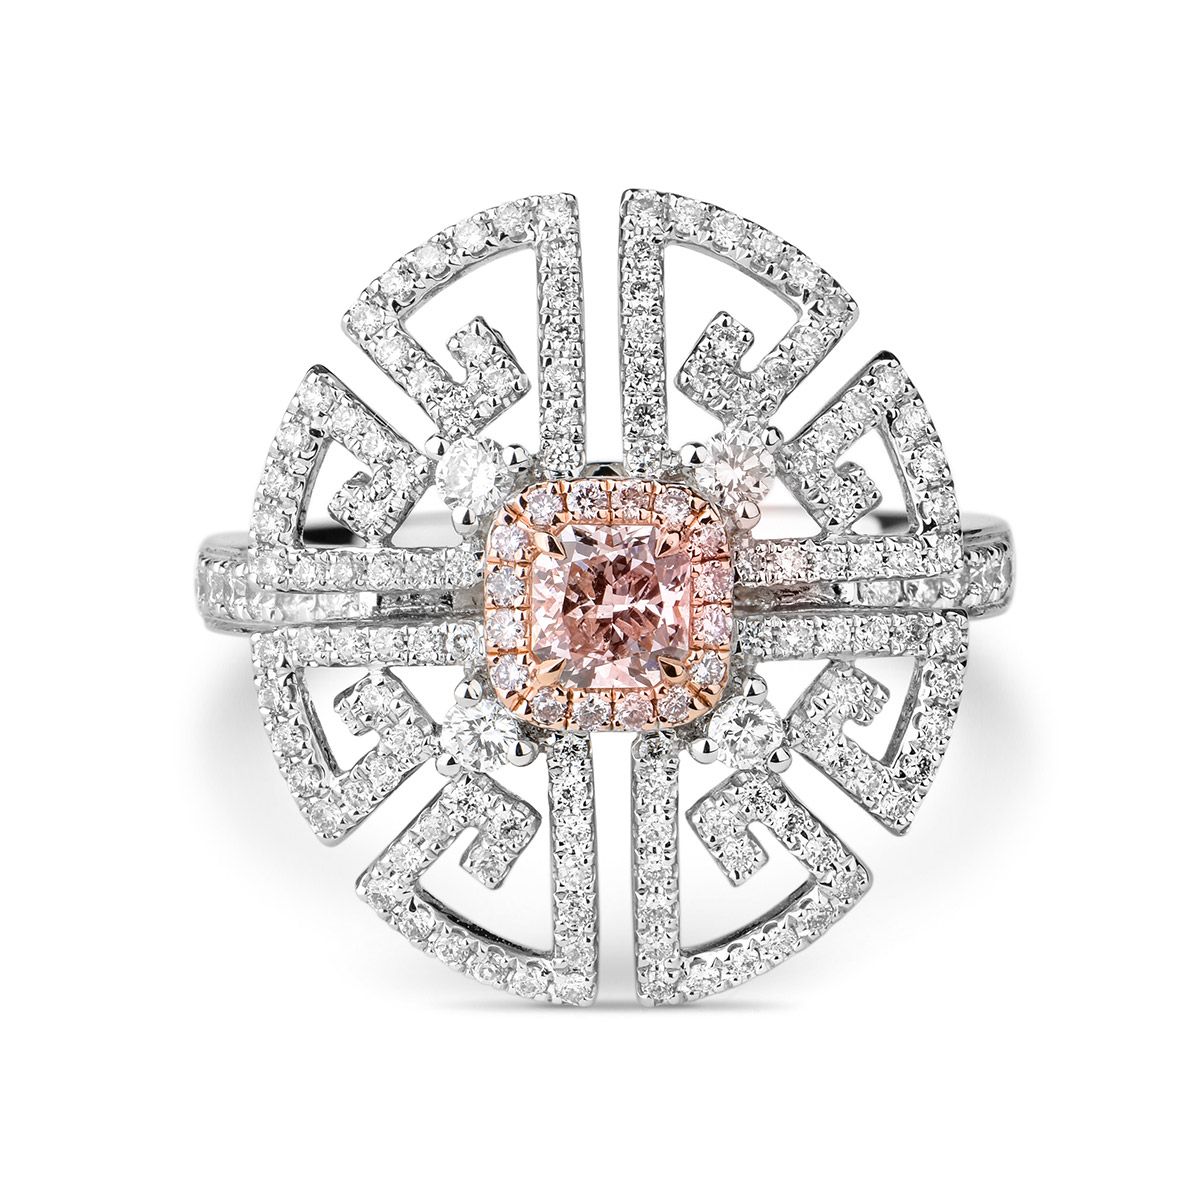 Light Pink Diamond Ring, 0.27 Ct. (0.90 Ct. TW), Radiant shape, GIA Certified, 1207462554